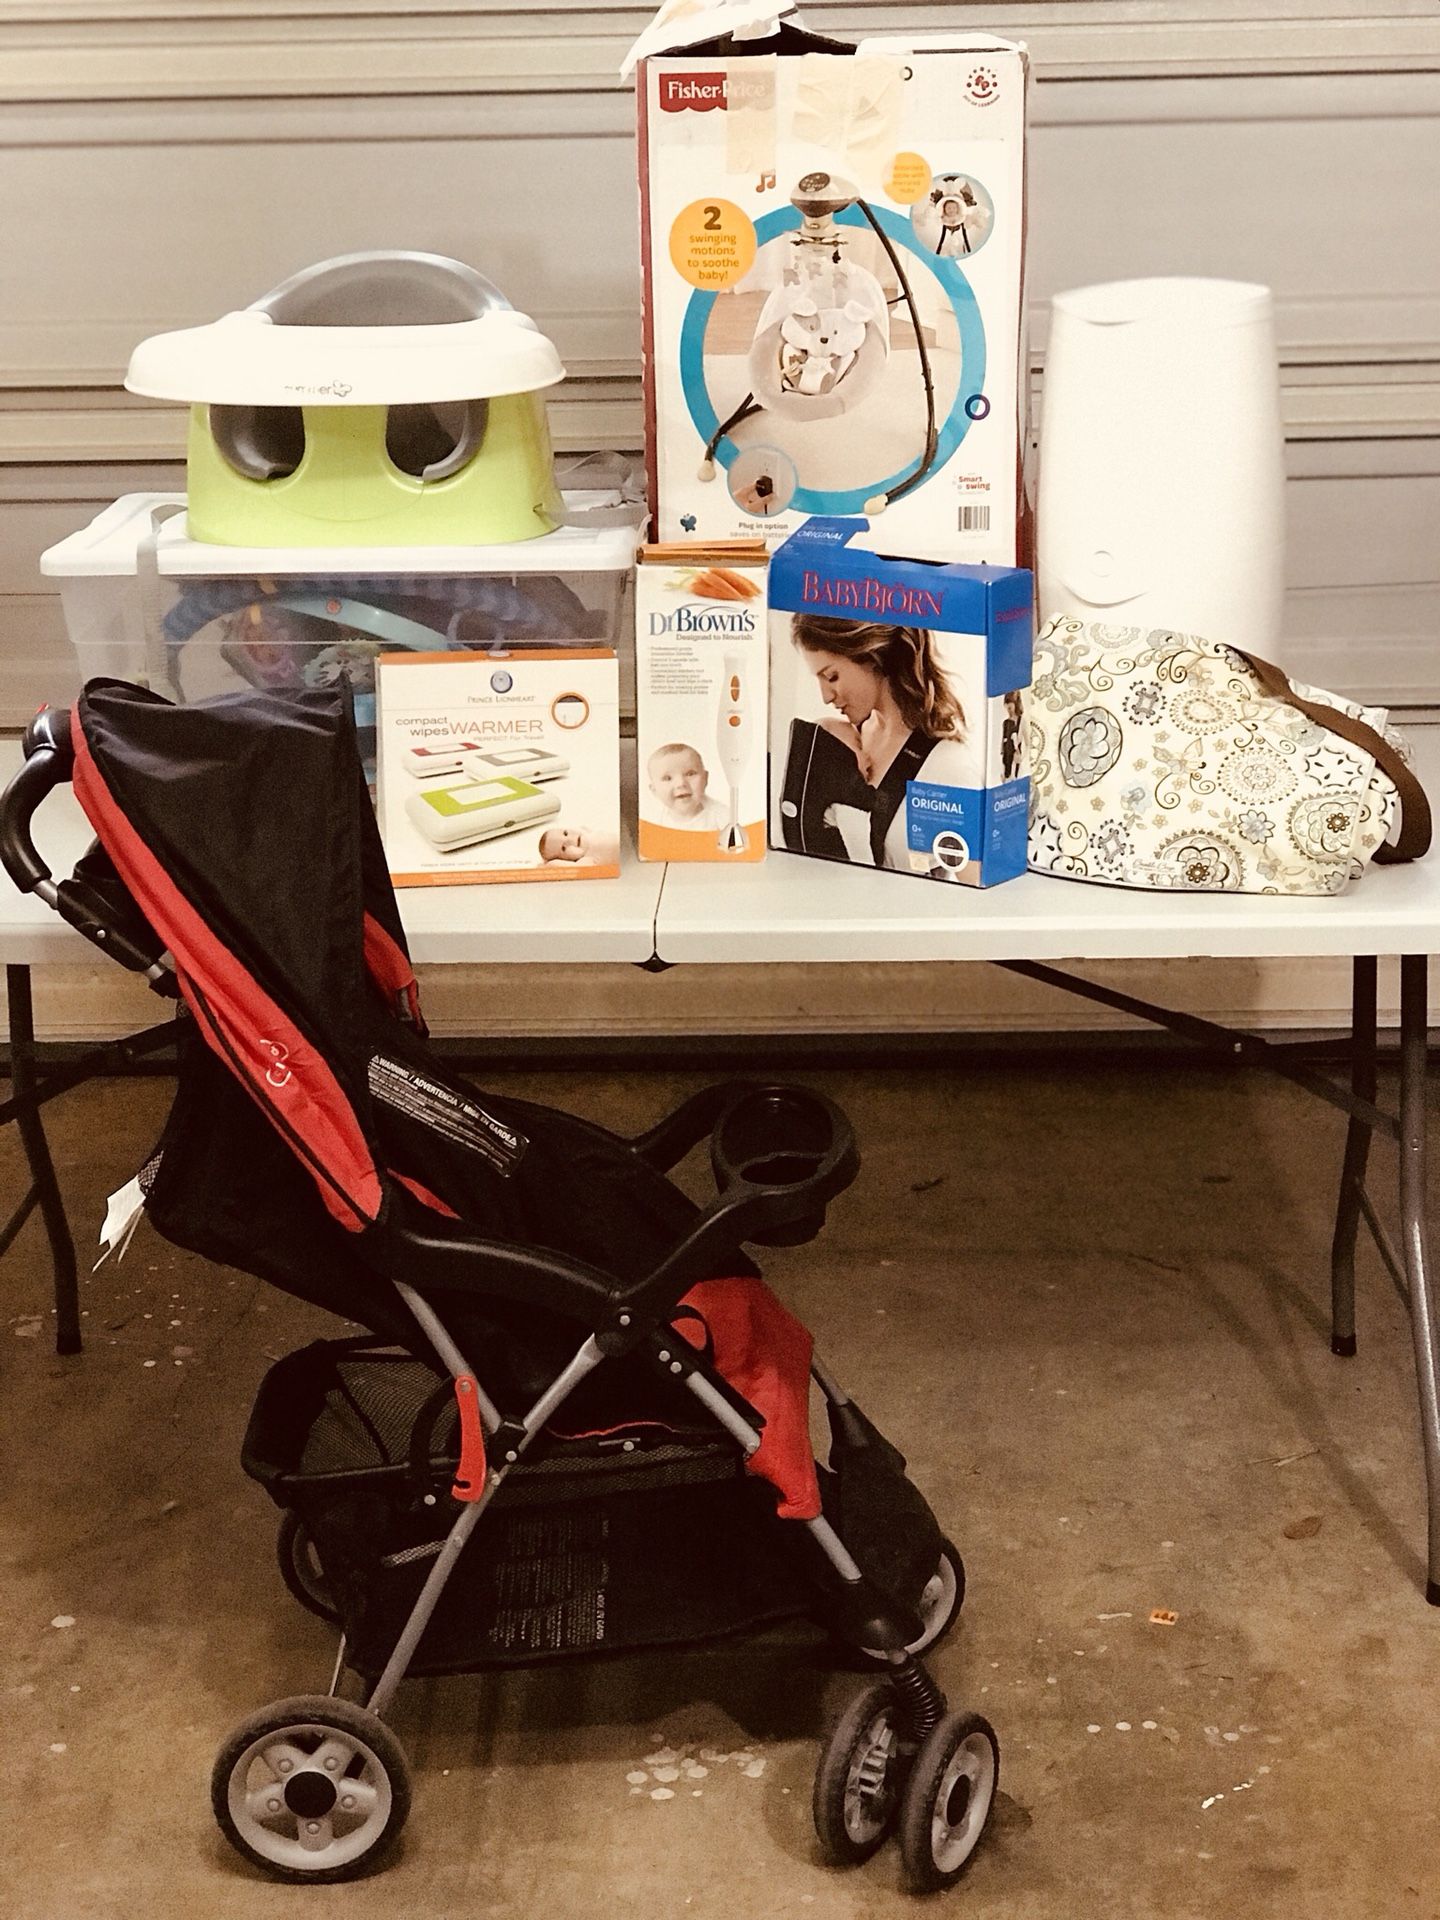 I’m Having a Baby! Kit Set. Wipe warmer, Stroller, swing chair, Playmat, booster seat, Baby Carrier, Diaper Pale, Food Processor, Diaper Bag